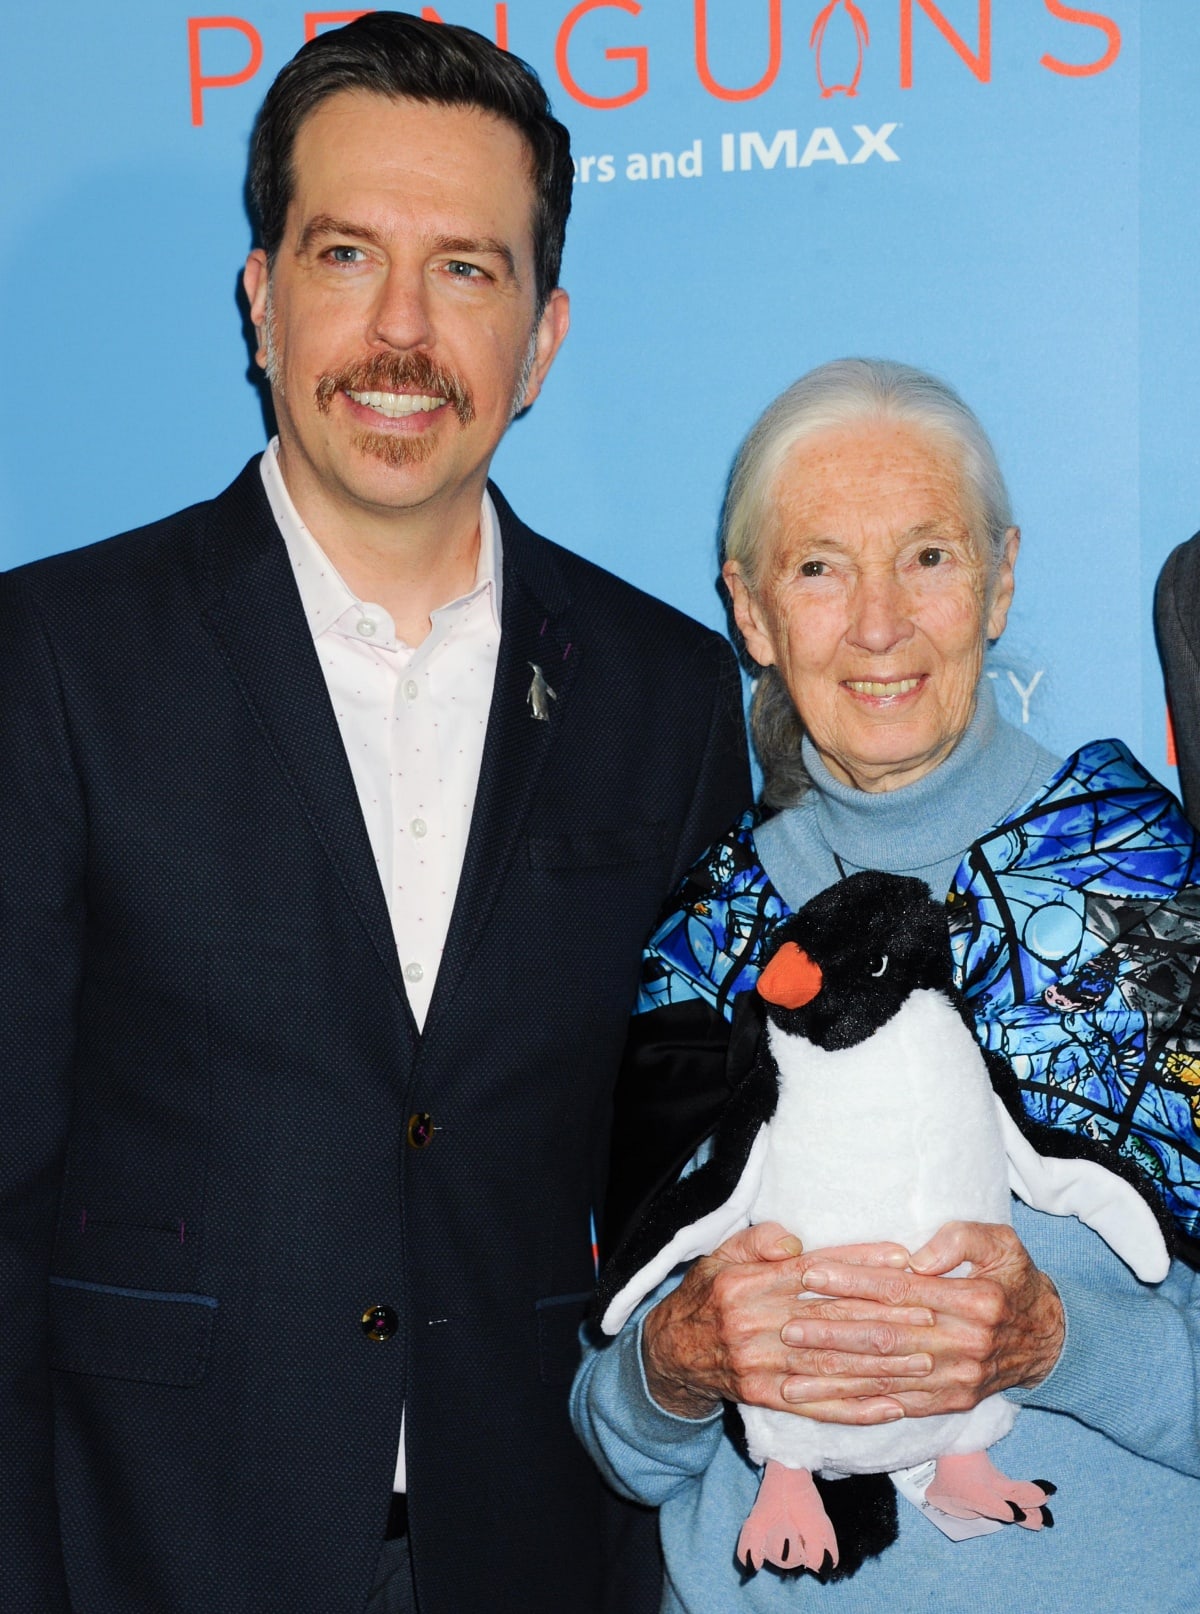 Ed Helms with Dr. Jane Goodall at a special New York screening of Penguins hosted by The Cinema Society and Disneynature